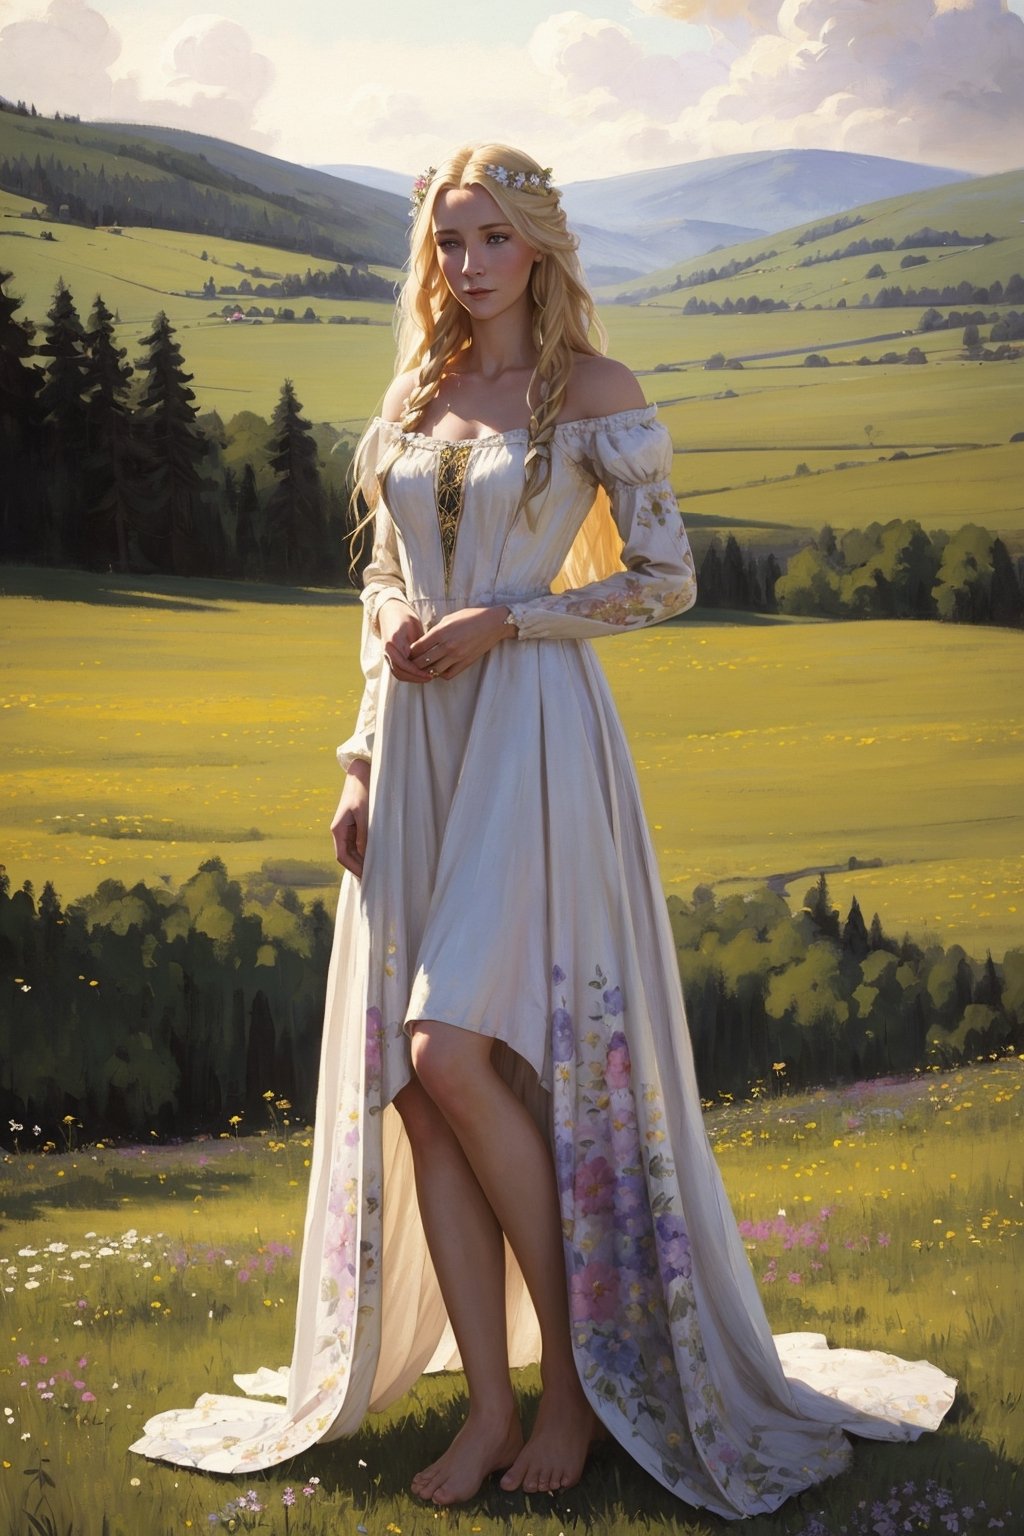 Portrait of a 25-year-old girl with long blonde hair, dressed in a dress made of light material, barefoot, standing in a meadow among flowers, looking away,
 brom's art, depiction of an epic fantasy character, portrait of a character, fantasy art, works by Richard Schmid, A.Mukha, Volegov, impressionism